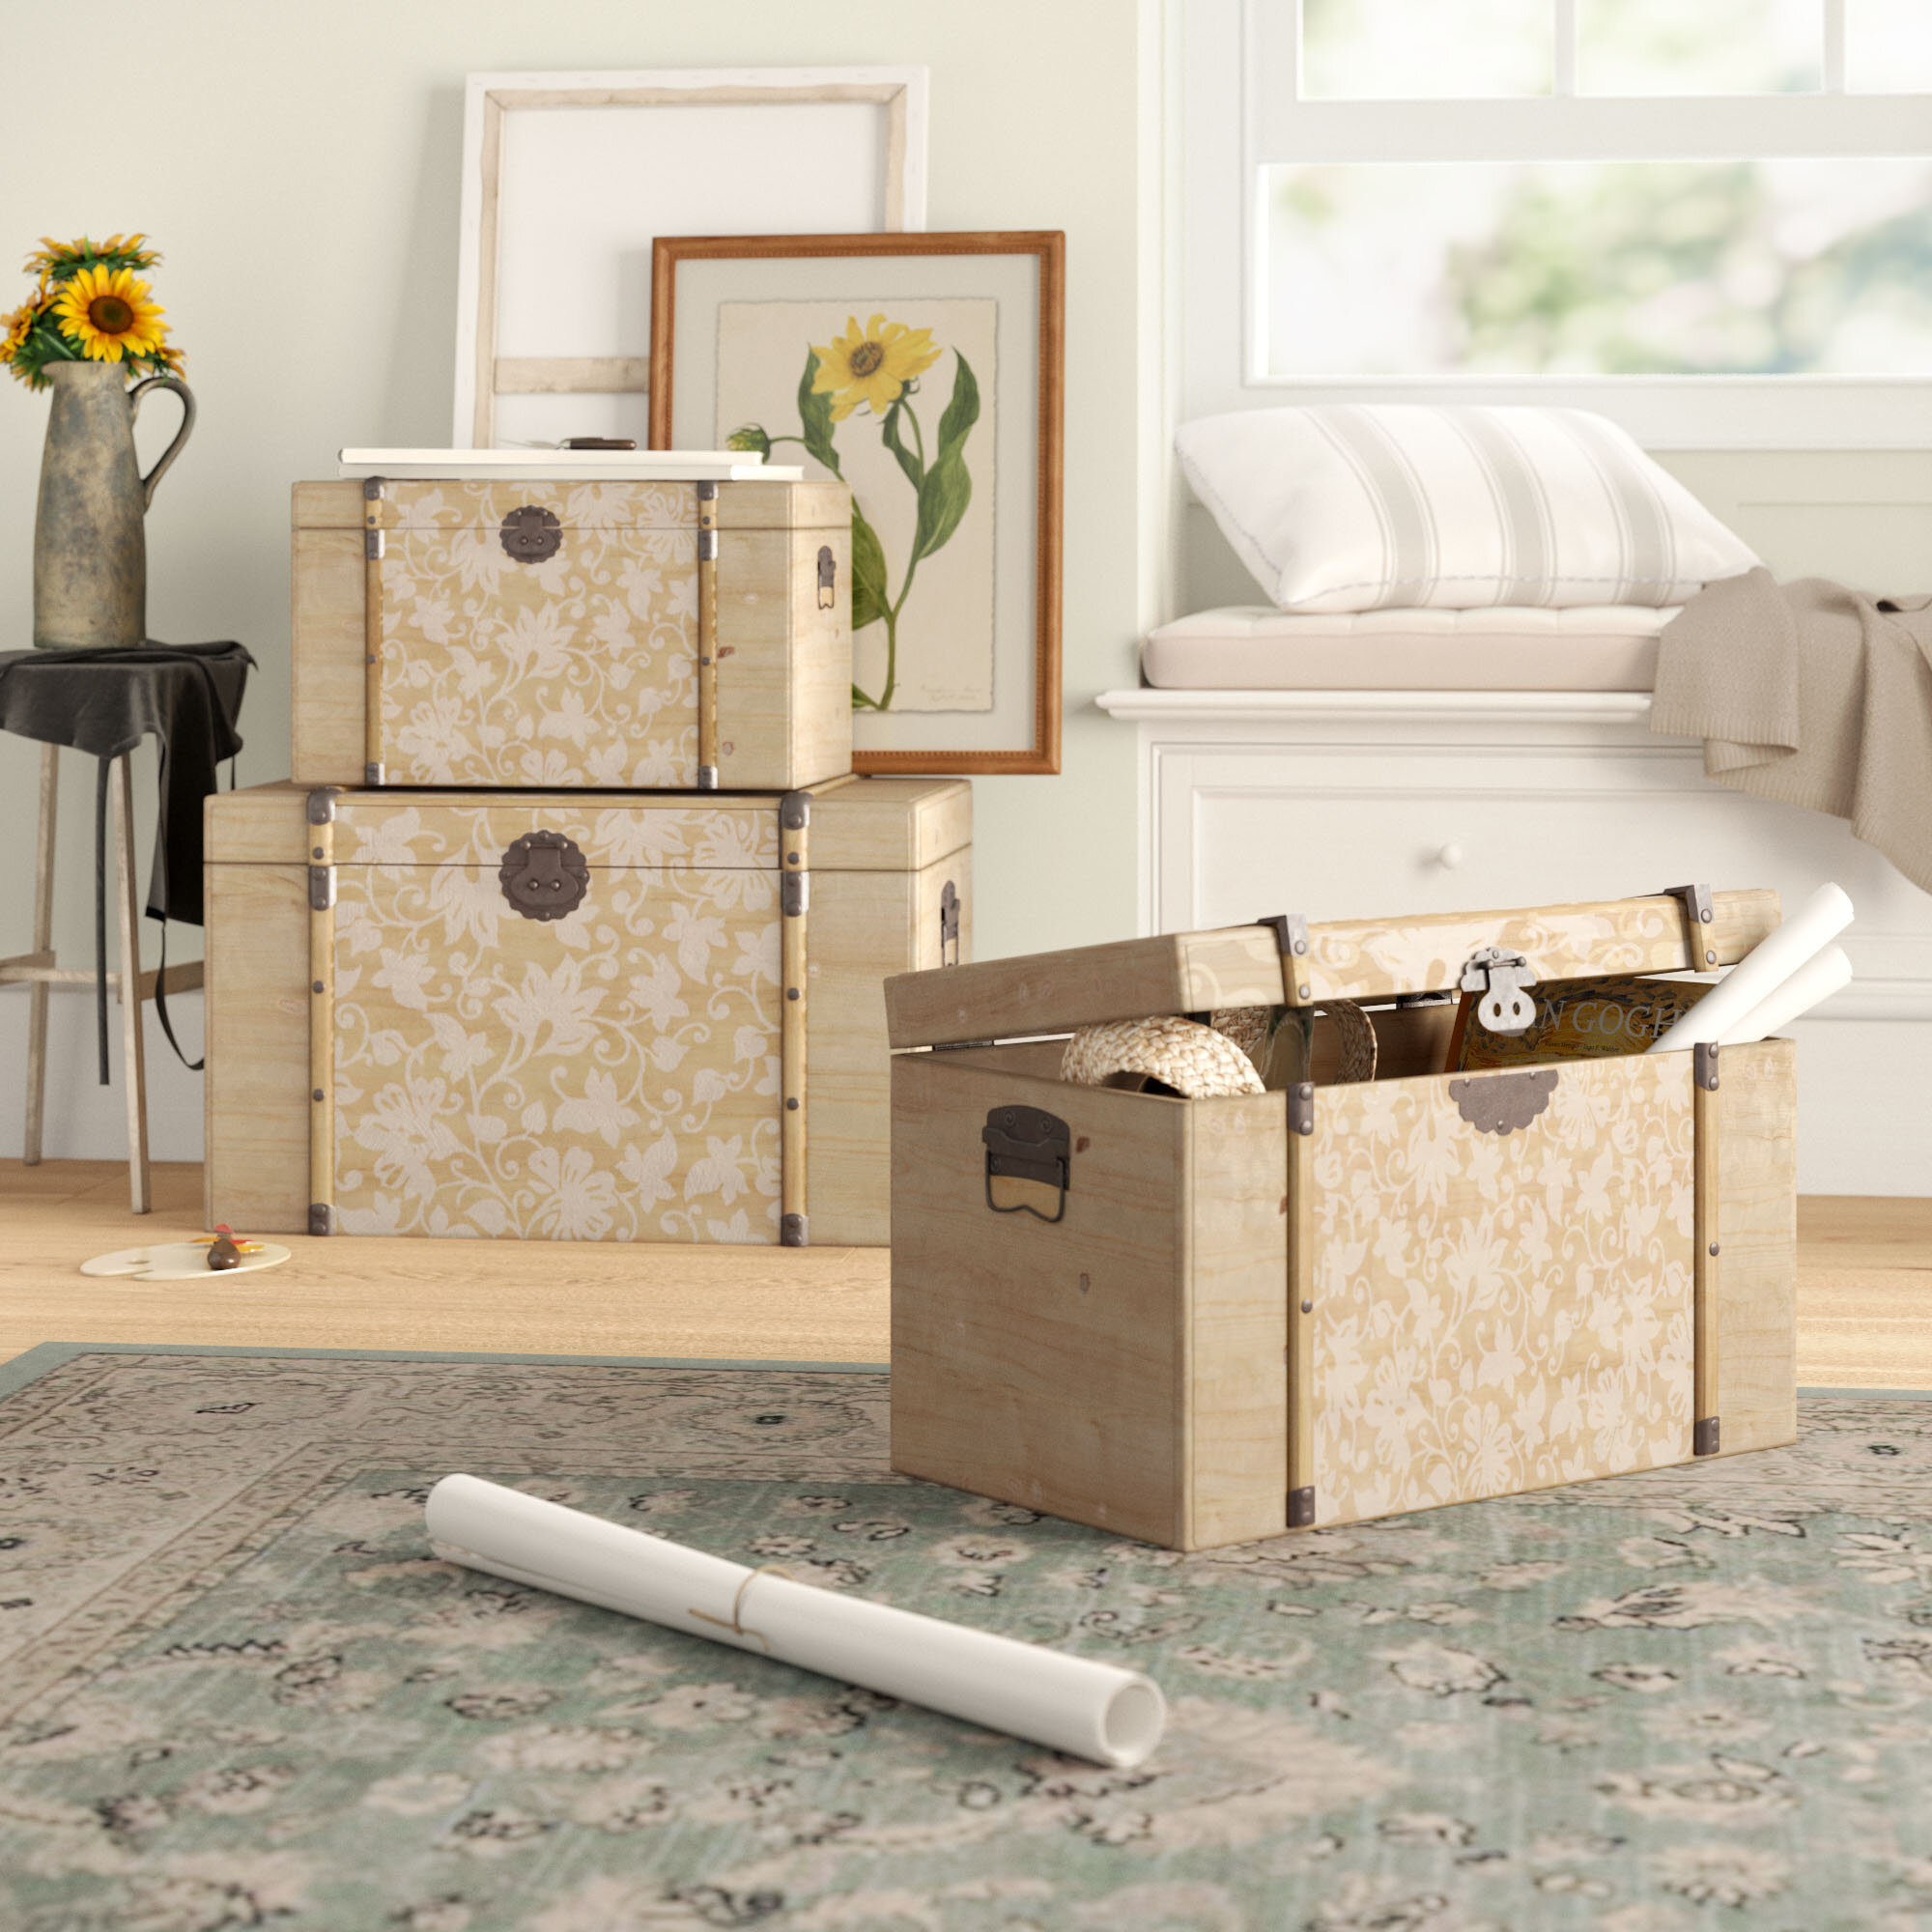 Ophelia Co Detroit Reed Stencilled 3 Piece Trunk Set Reviews